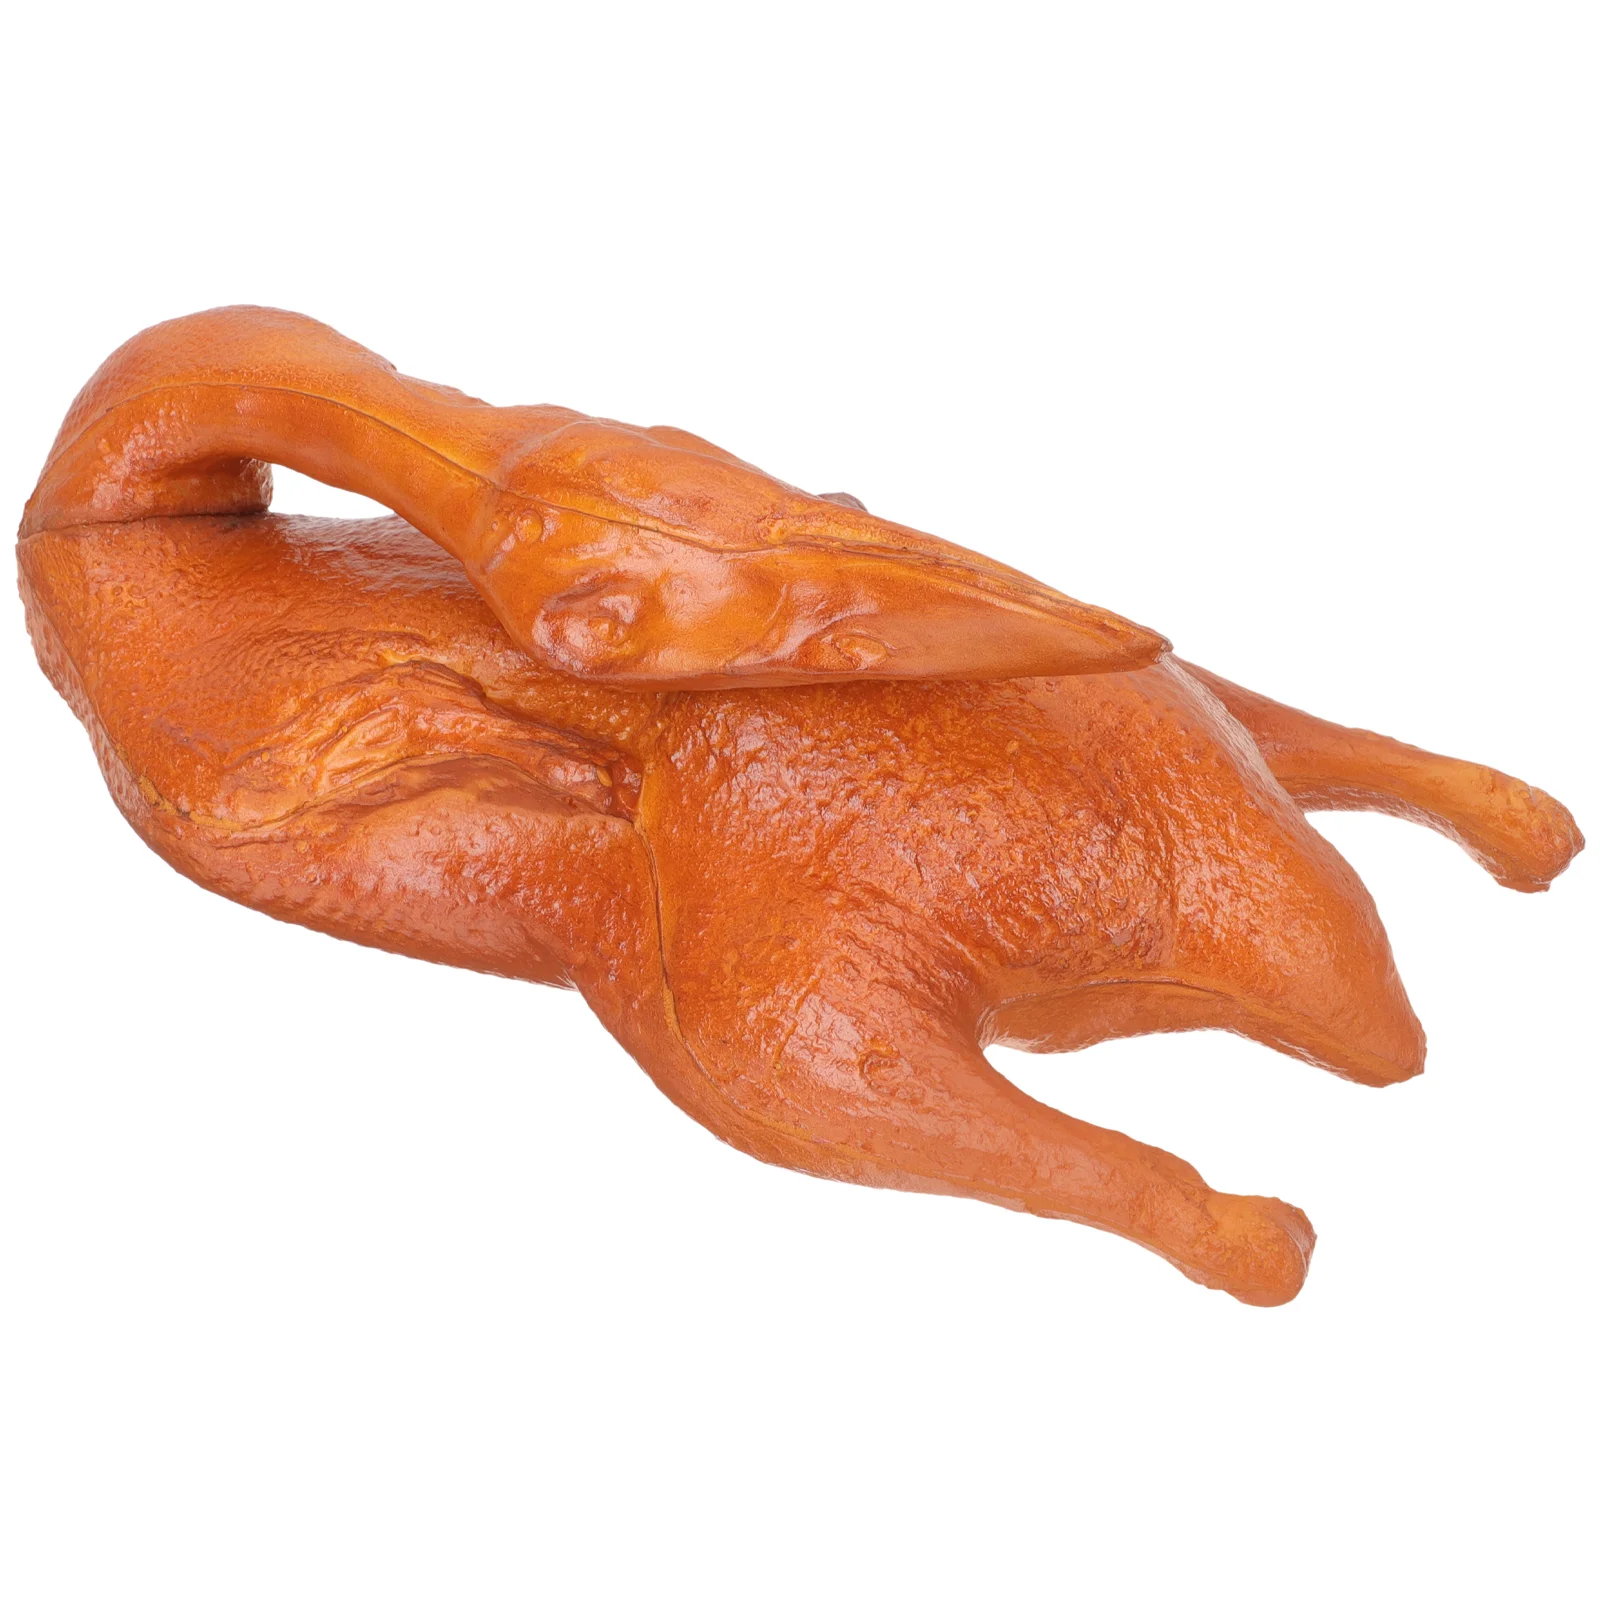 

Simulated Roast Duck Model Simulated Roasted Duck Roast Duck Models Realistic Roast Duck Model Window Artificial Roast Duck